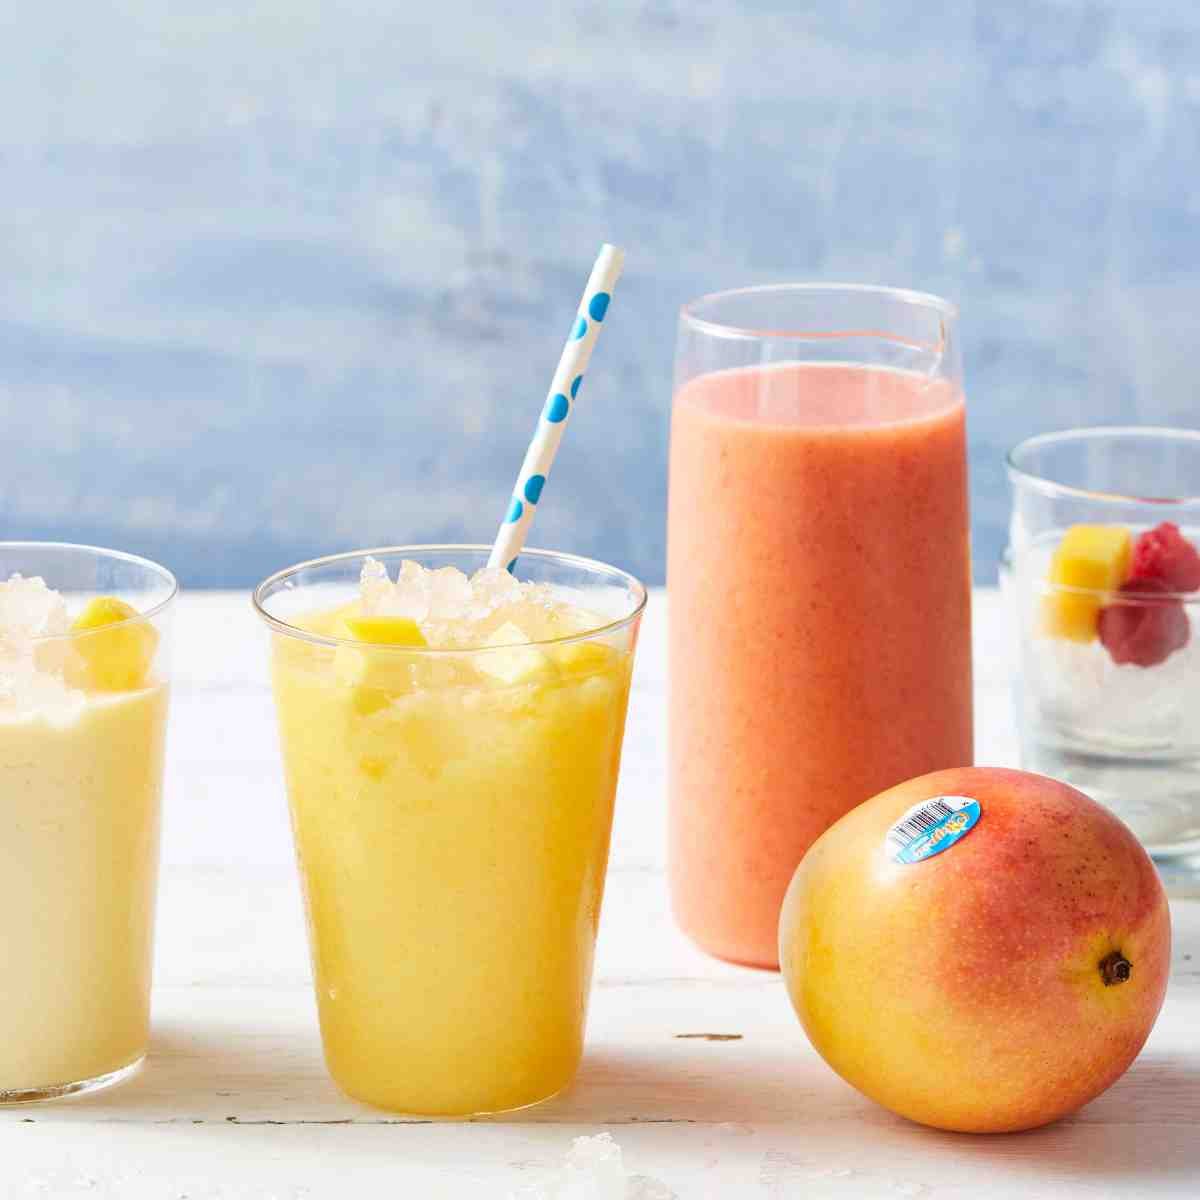 Three glasses filled with mango ginger smoothie, with a mango placed next to the glasses.